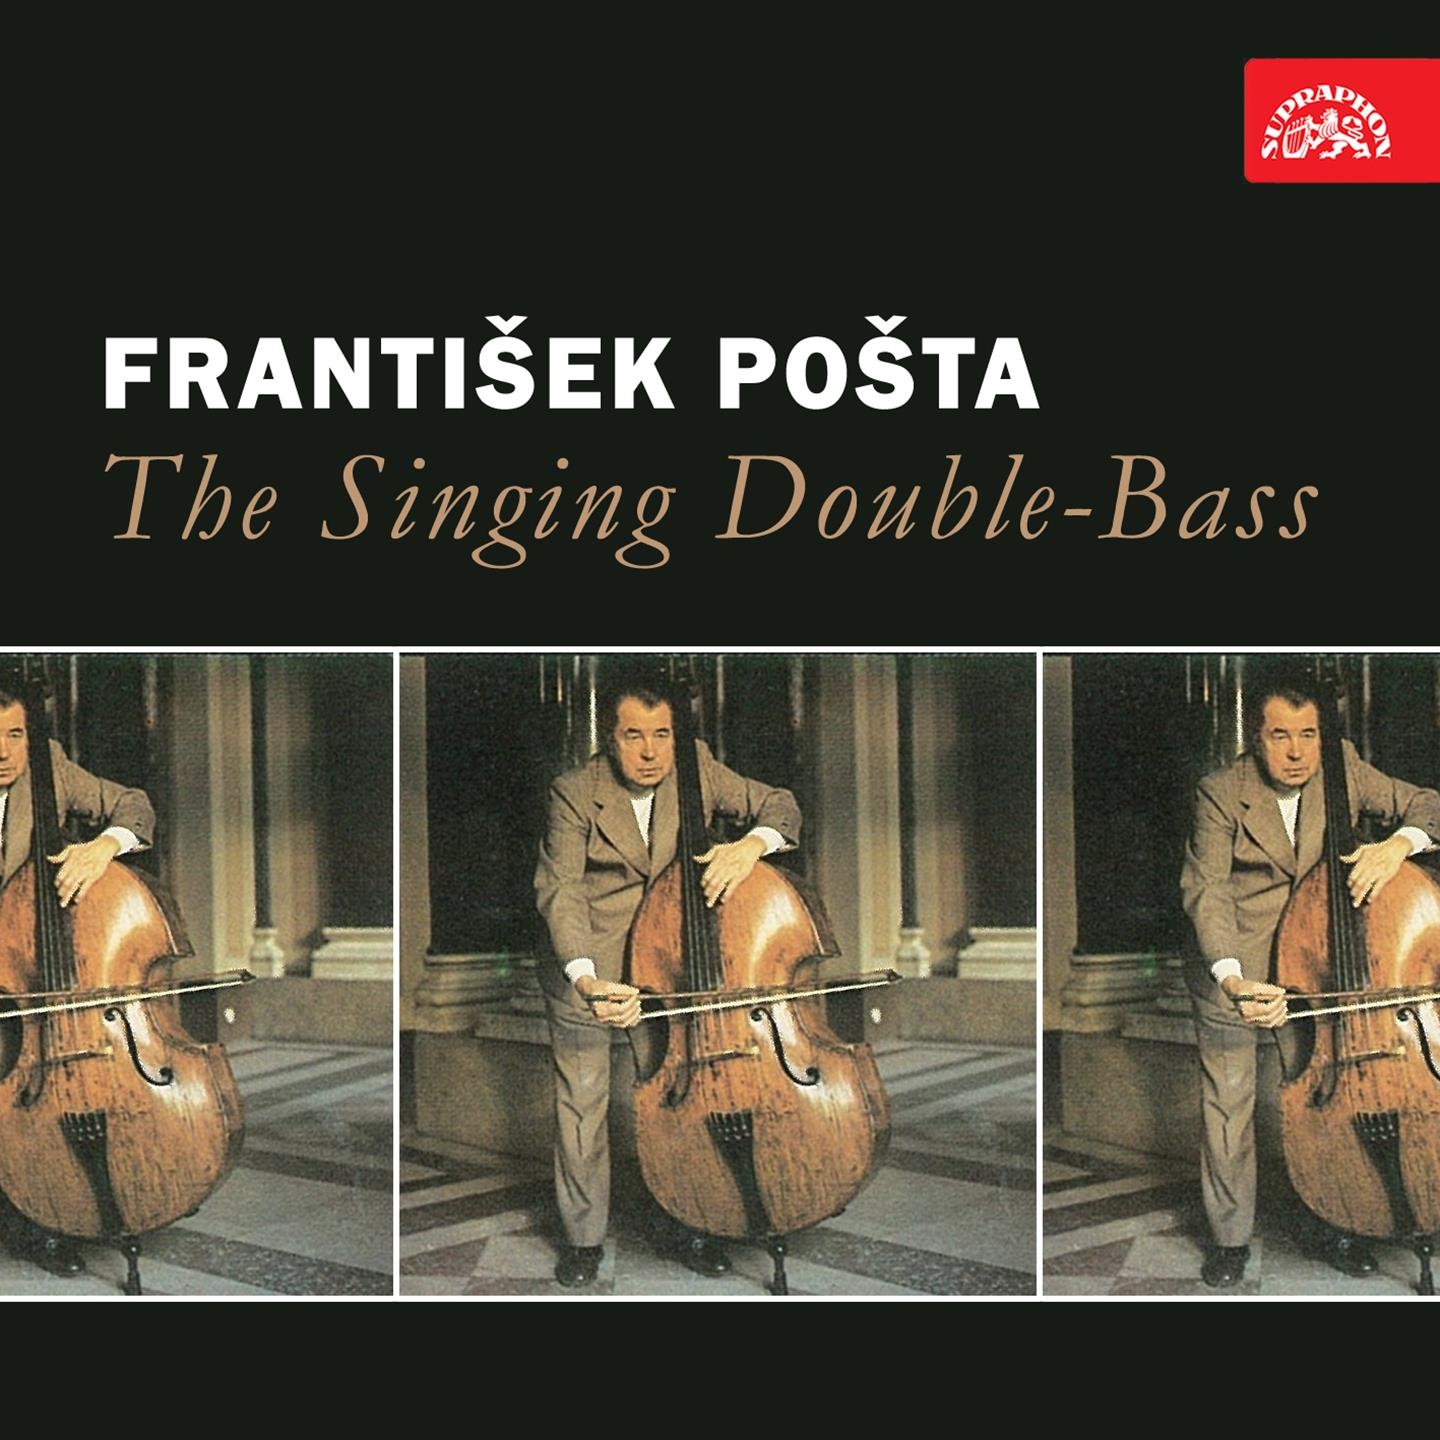 The Singing Double-Bass